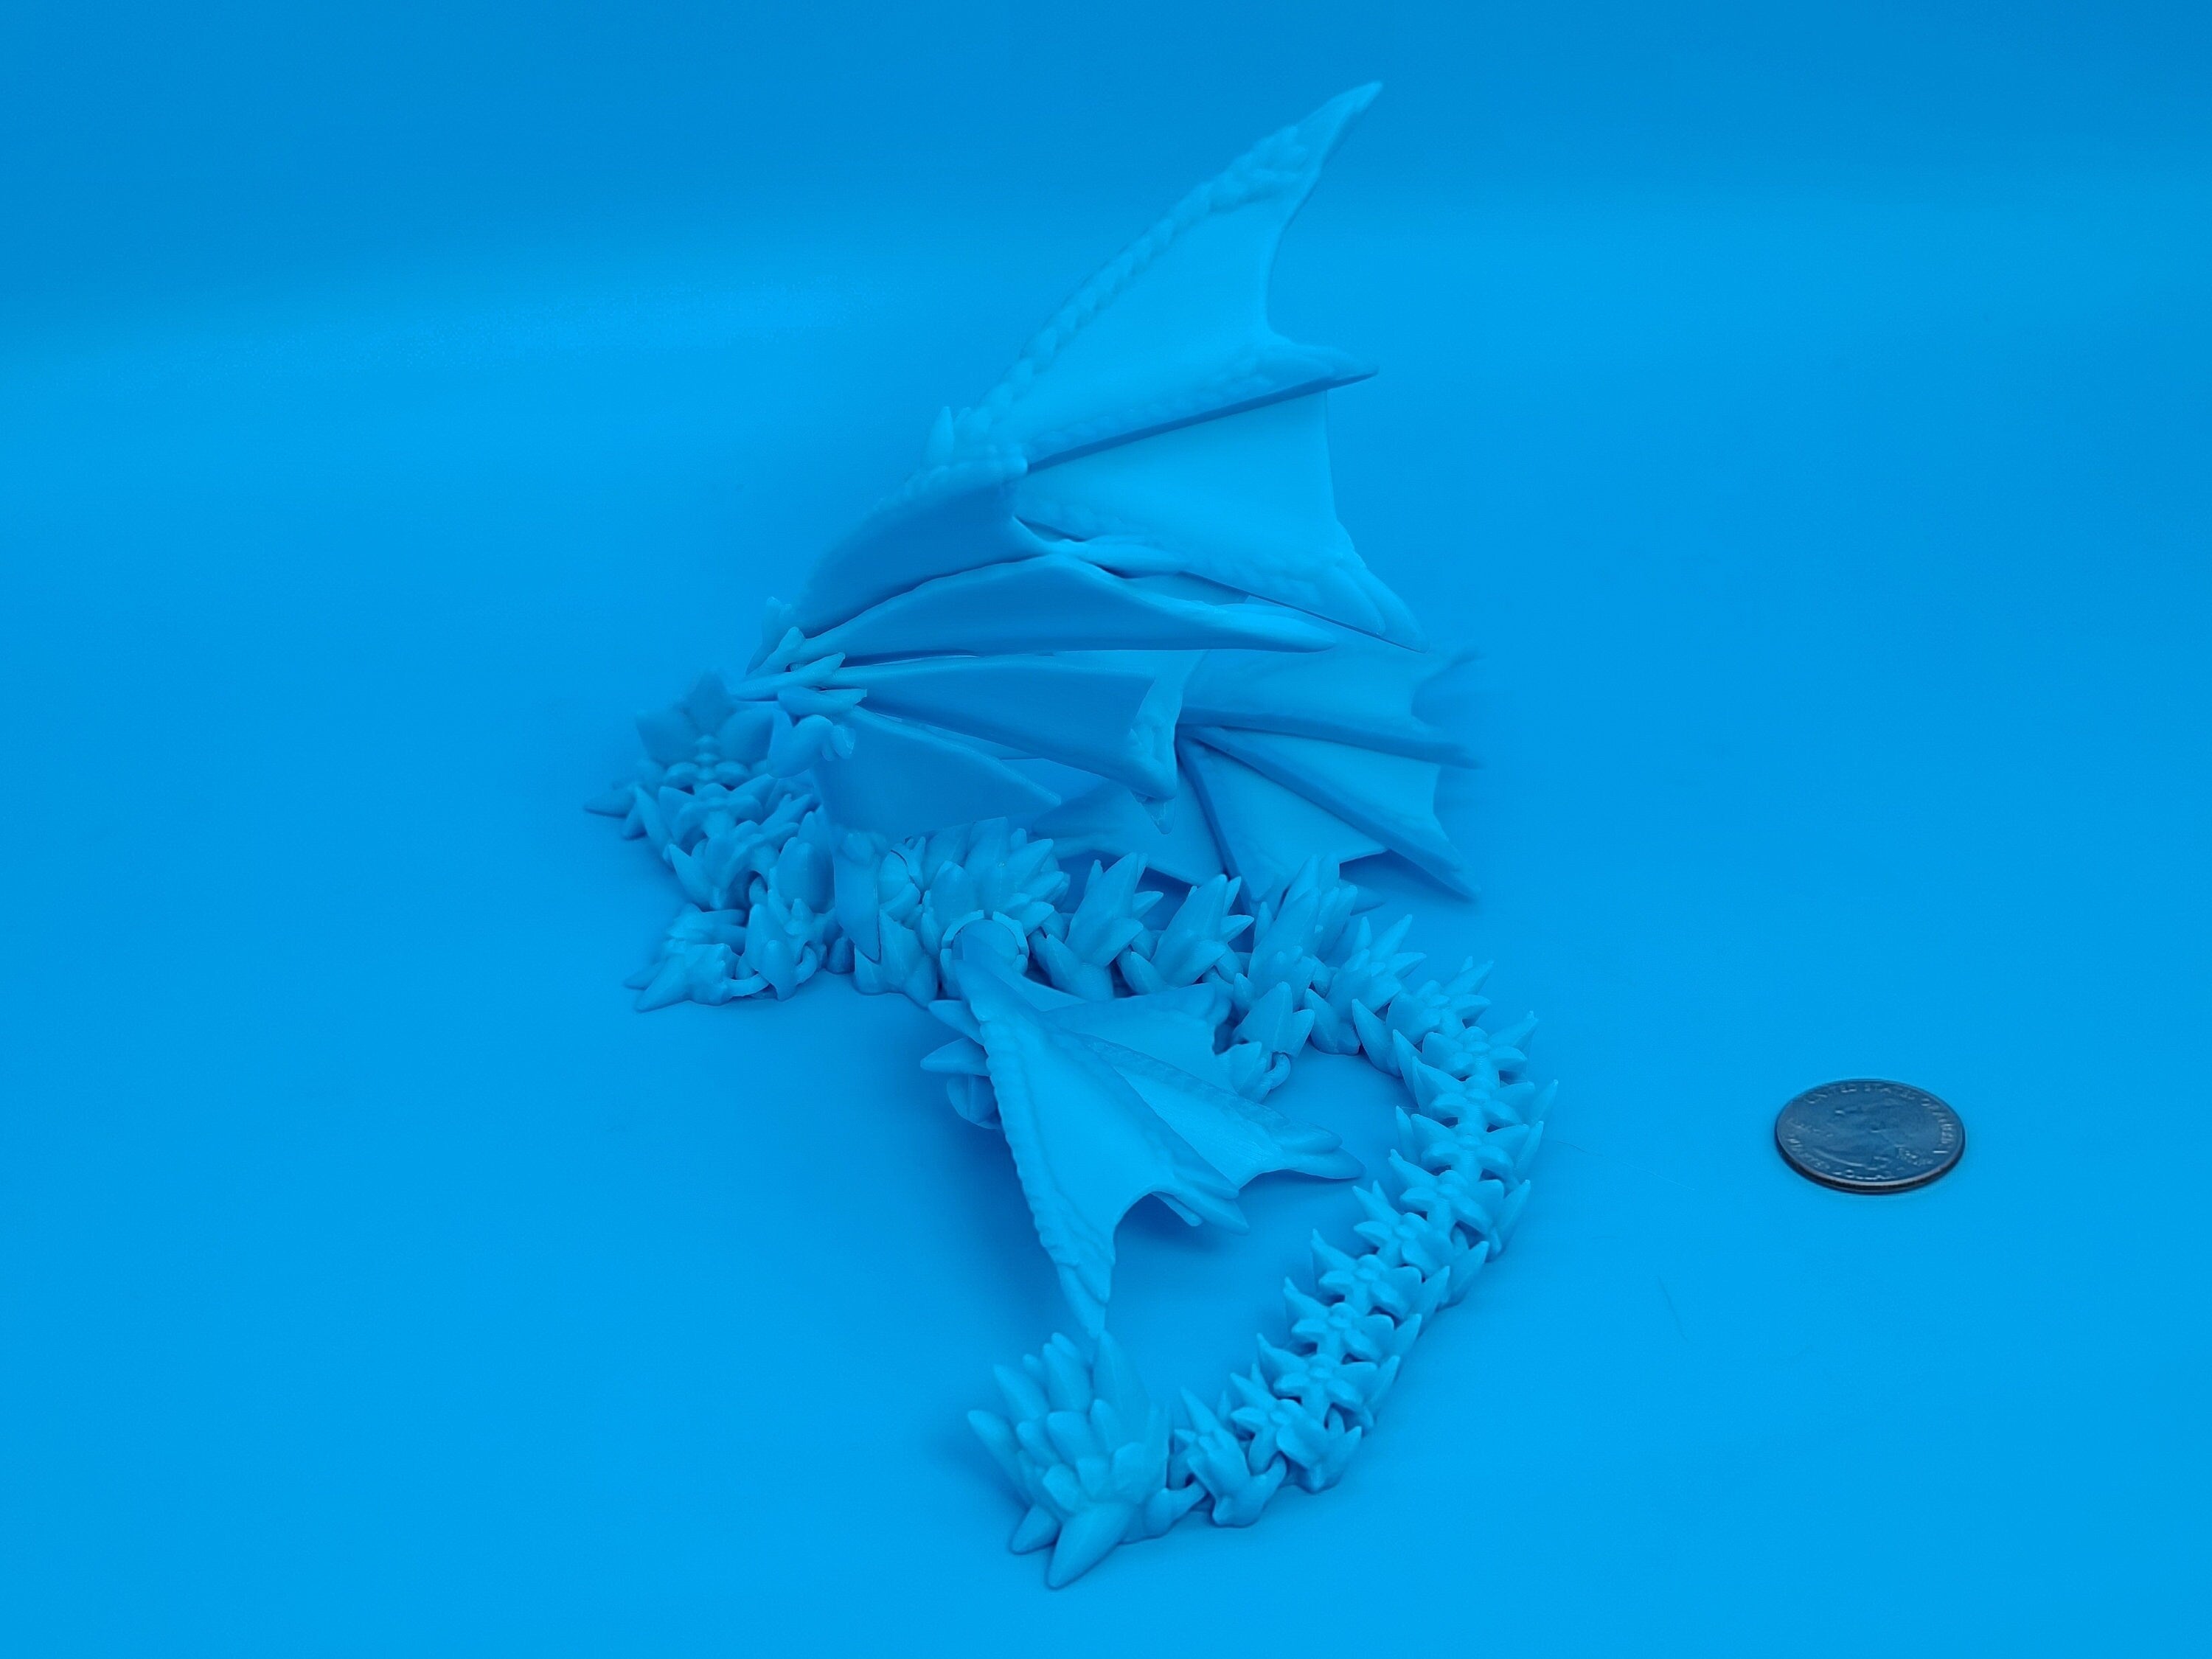 Spike Dragon with wings | 3D Printed Articulating Dragon 11 in.